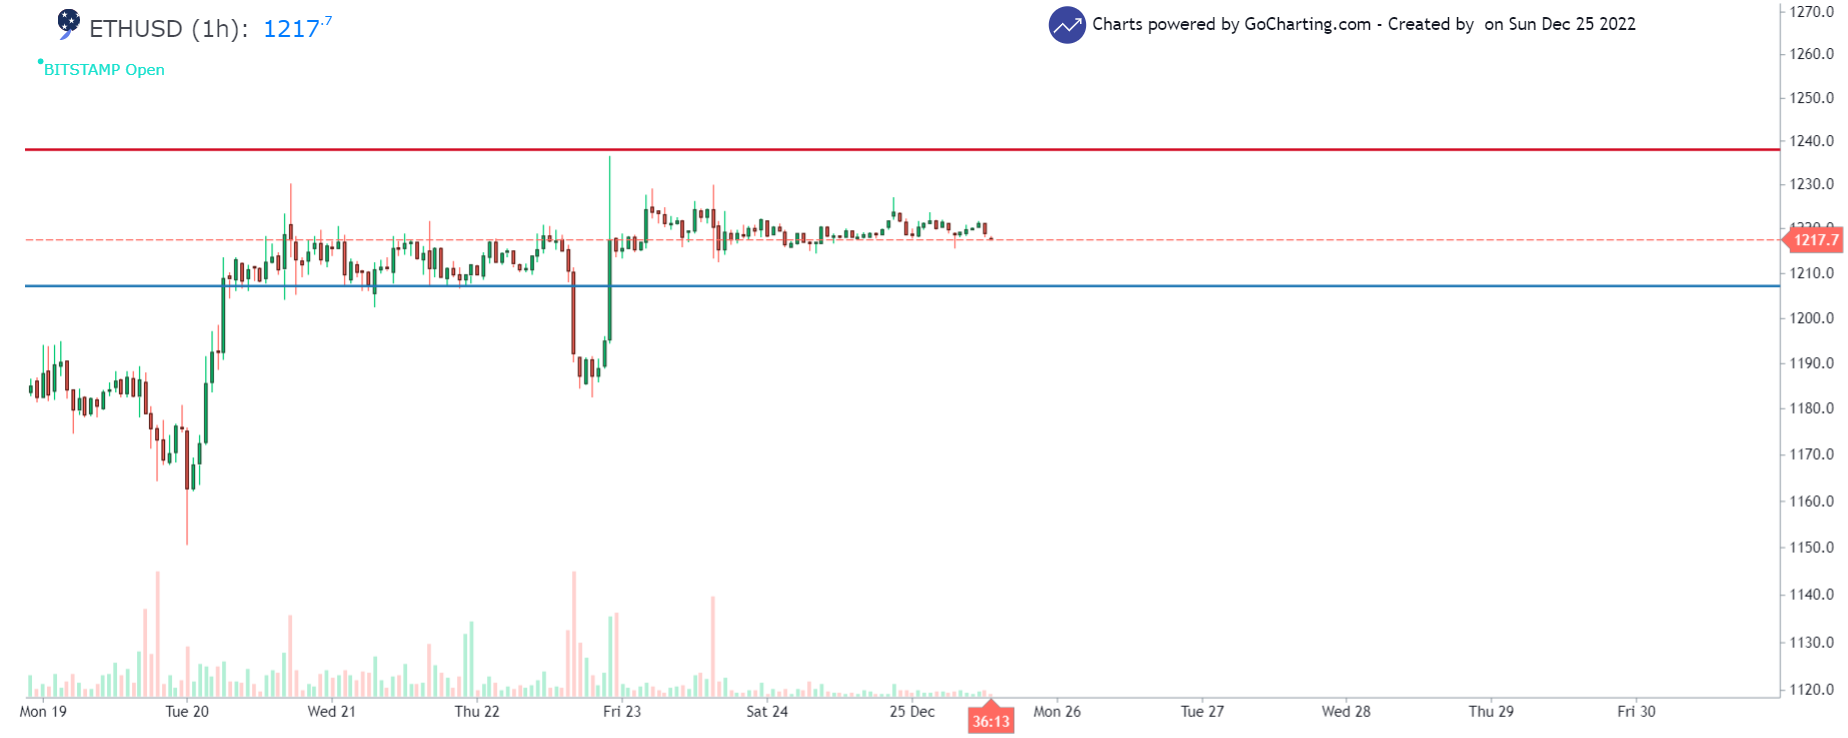 ETH/USD 1-hour chart showing the price action of Ethereum